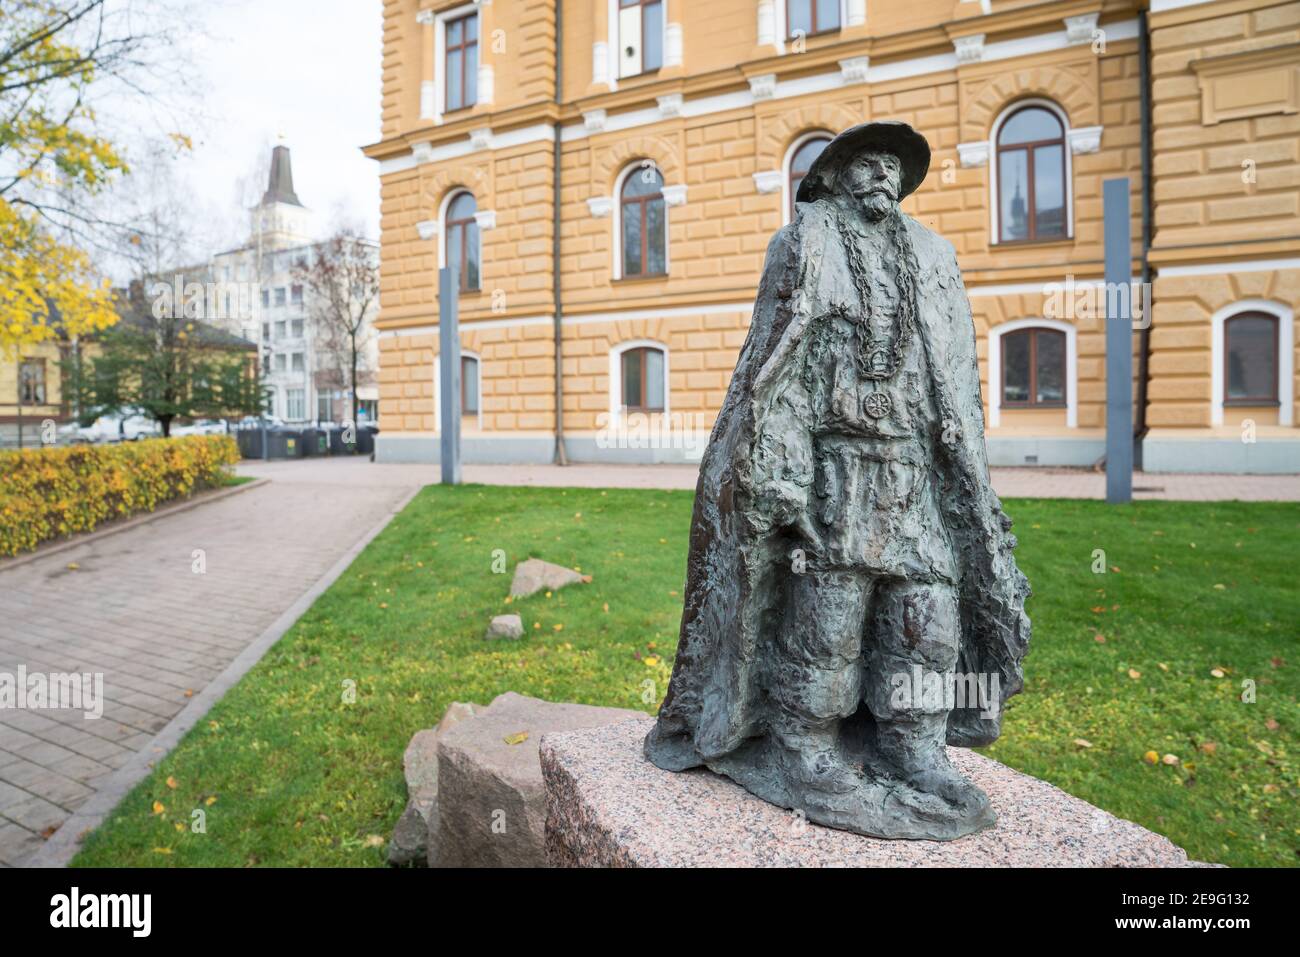 OULU, FINLAND - October 12, 2020: Bronze sculpture by Sanna Koivisto of finish man from early Suomi times at the Passage of Time in Maria Silfvan Park Stock Photo